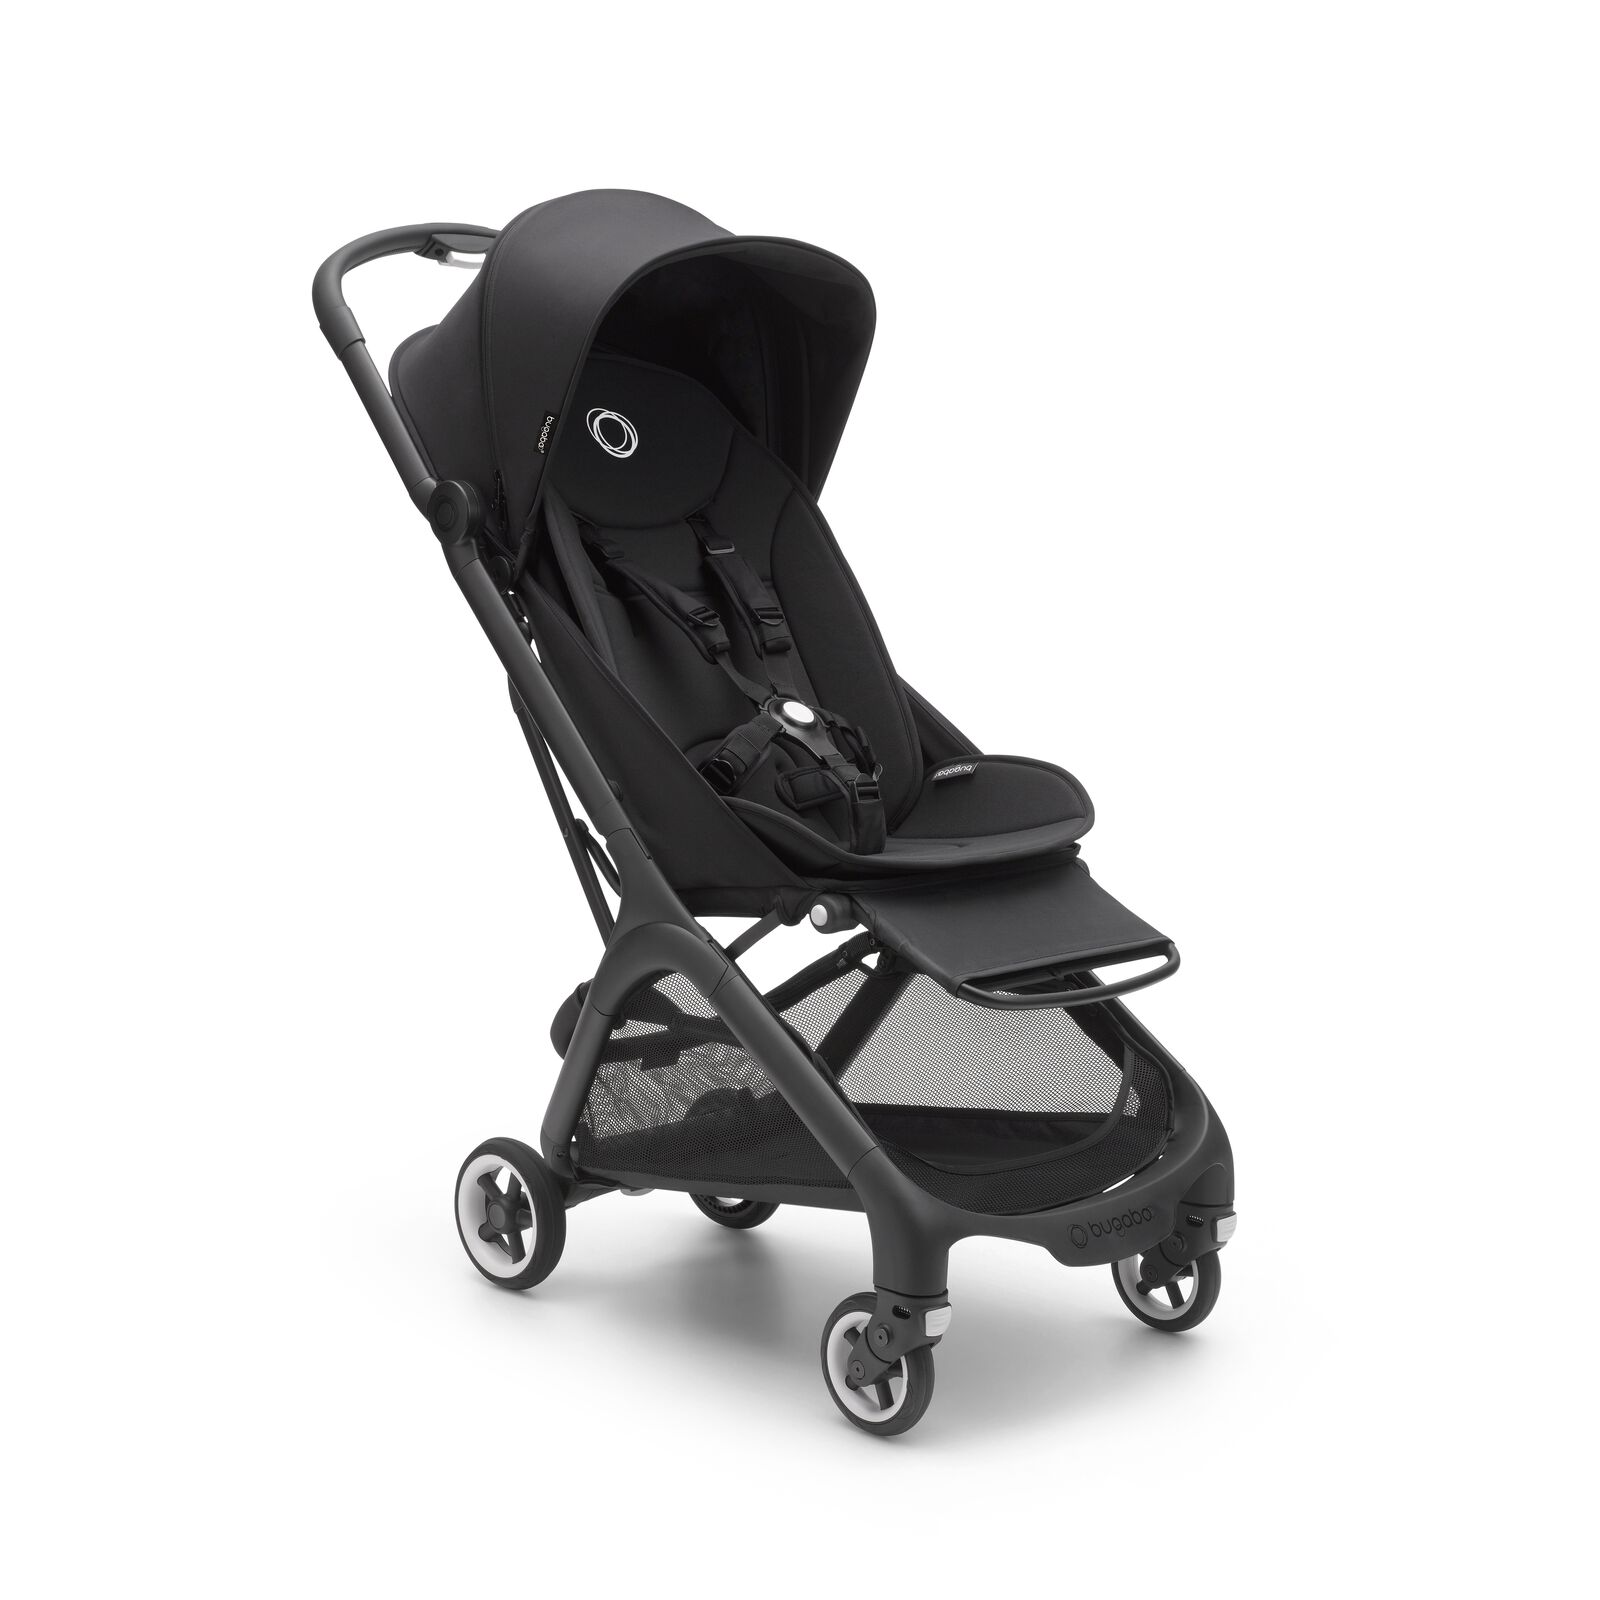 Bugaboo Butterfly seat pram - View 1